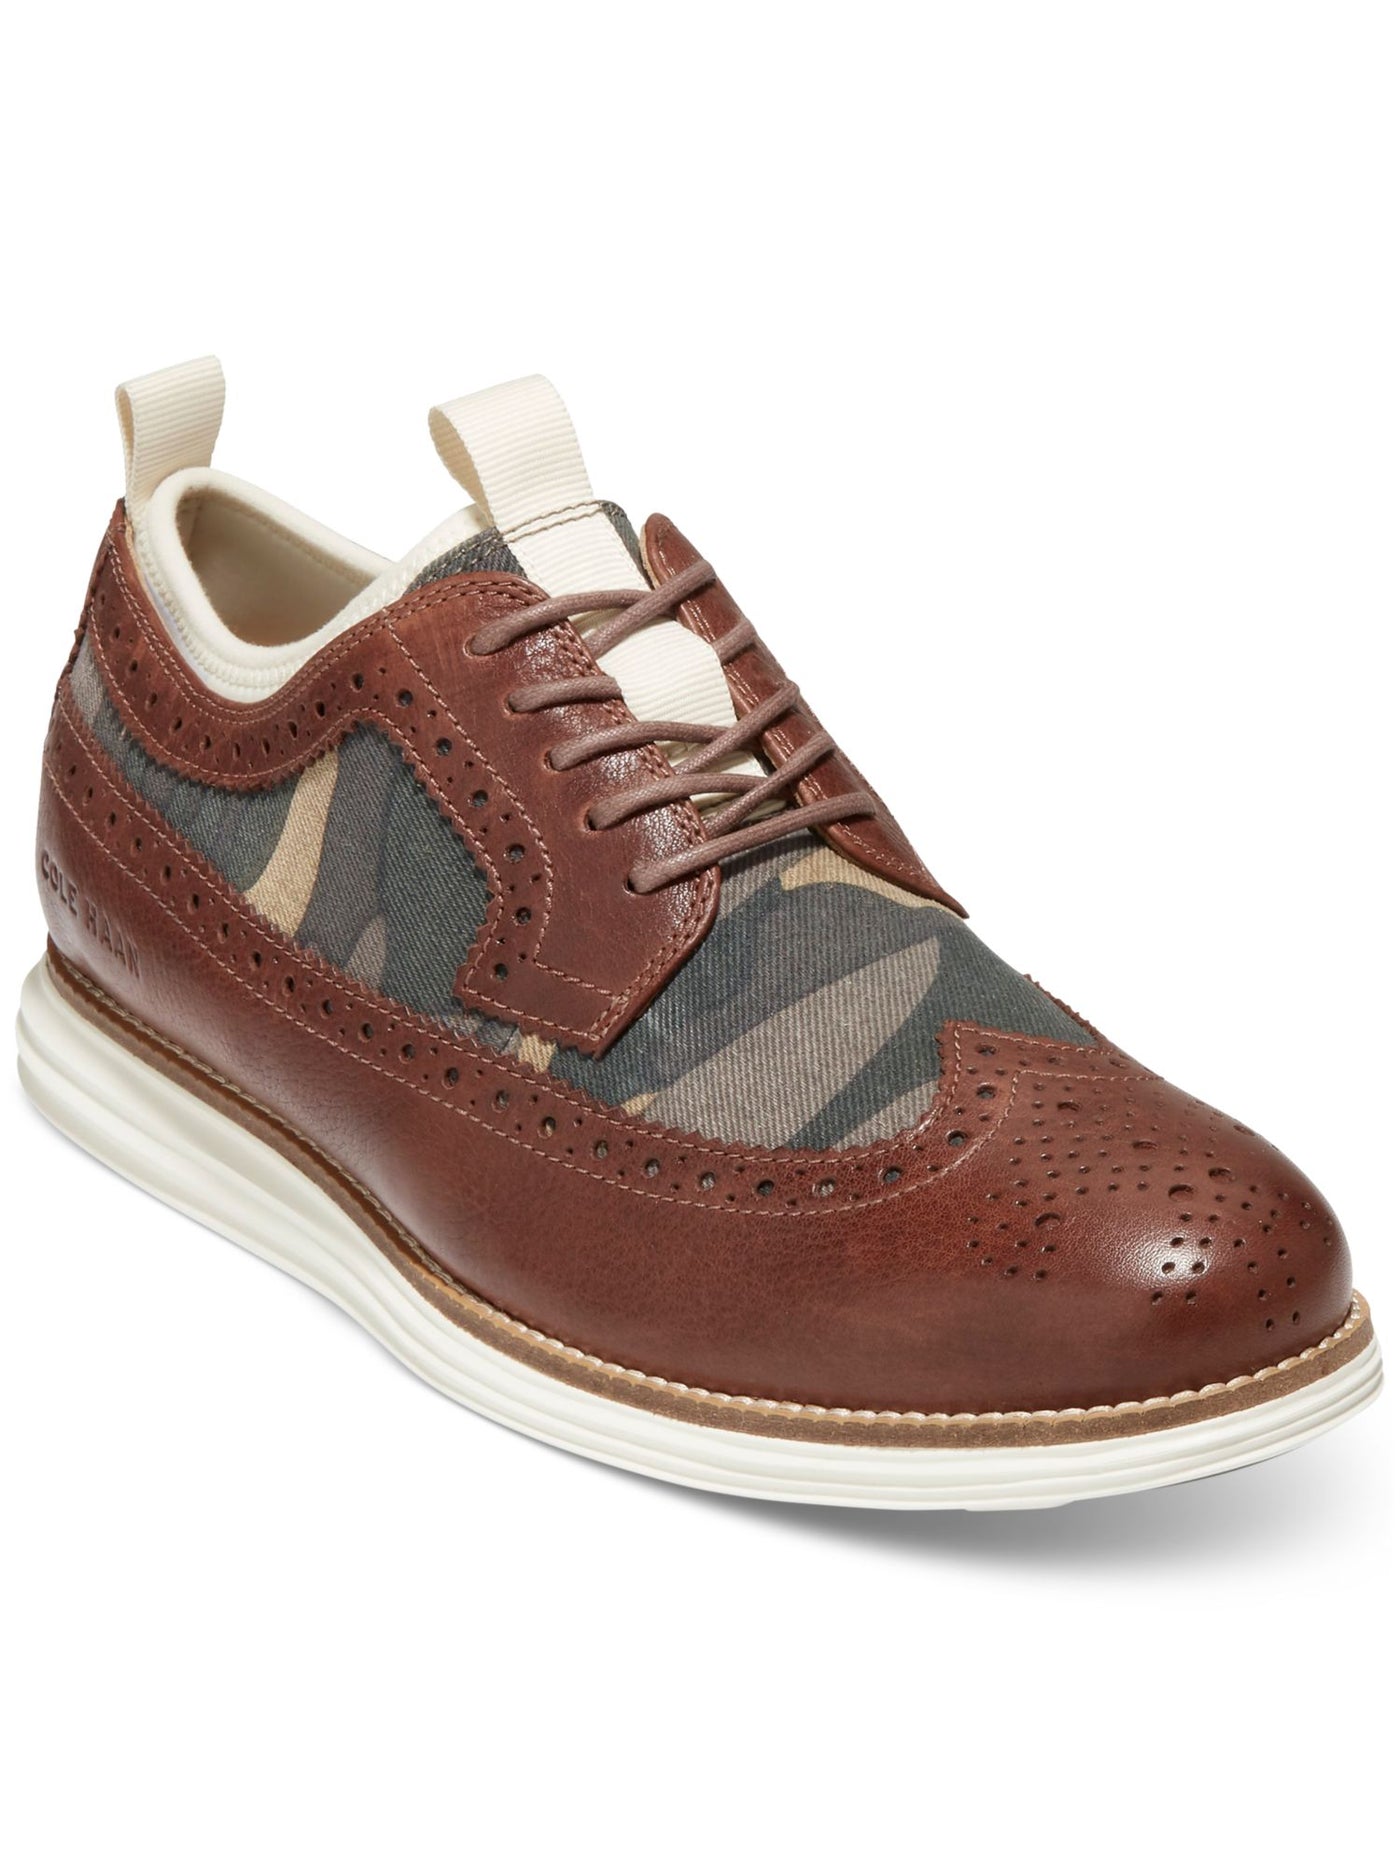 COLE HAAN GRANDSERIES Mens Brown Mixed Media Internal Neoprene Lining Dual Pull-Tabs Cushioned Longwing Wingtip Toe Wedge Lace-Up Oxford Shoes 12 M